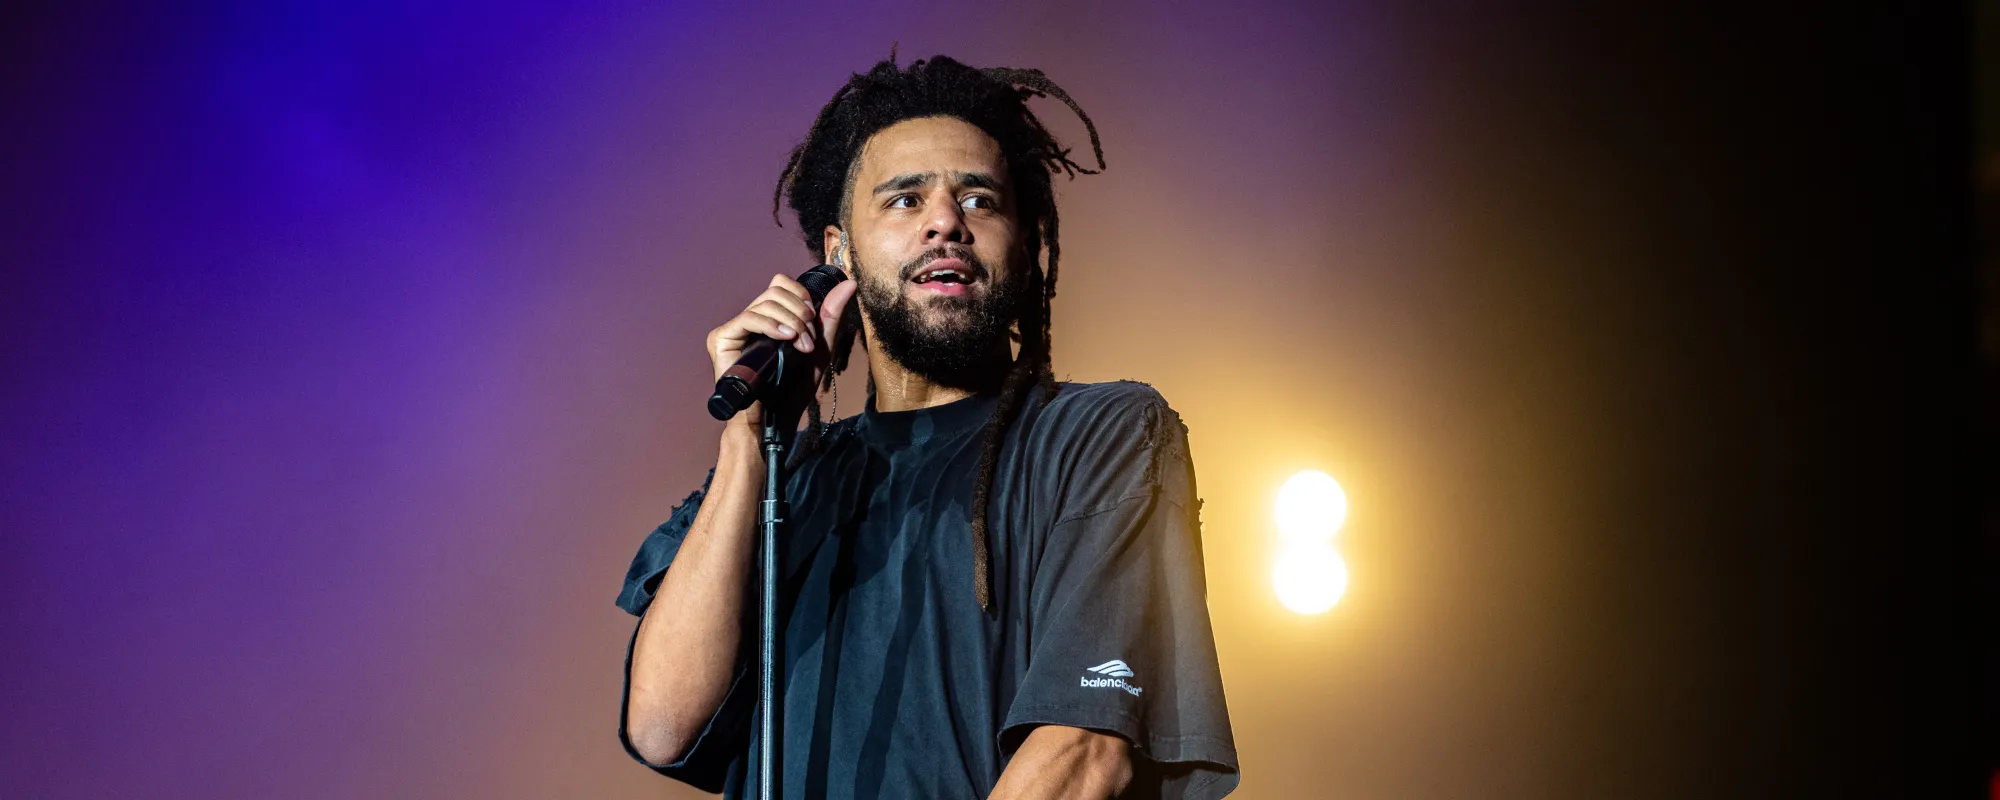 What Album Did J. Cole Say Is Better Than Michael Jackson’s ‘Thriller?’